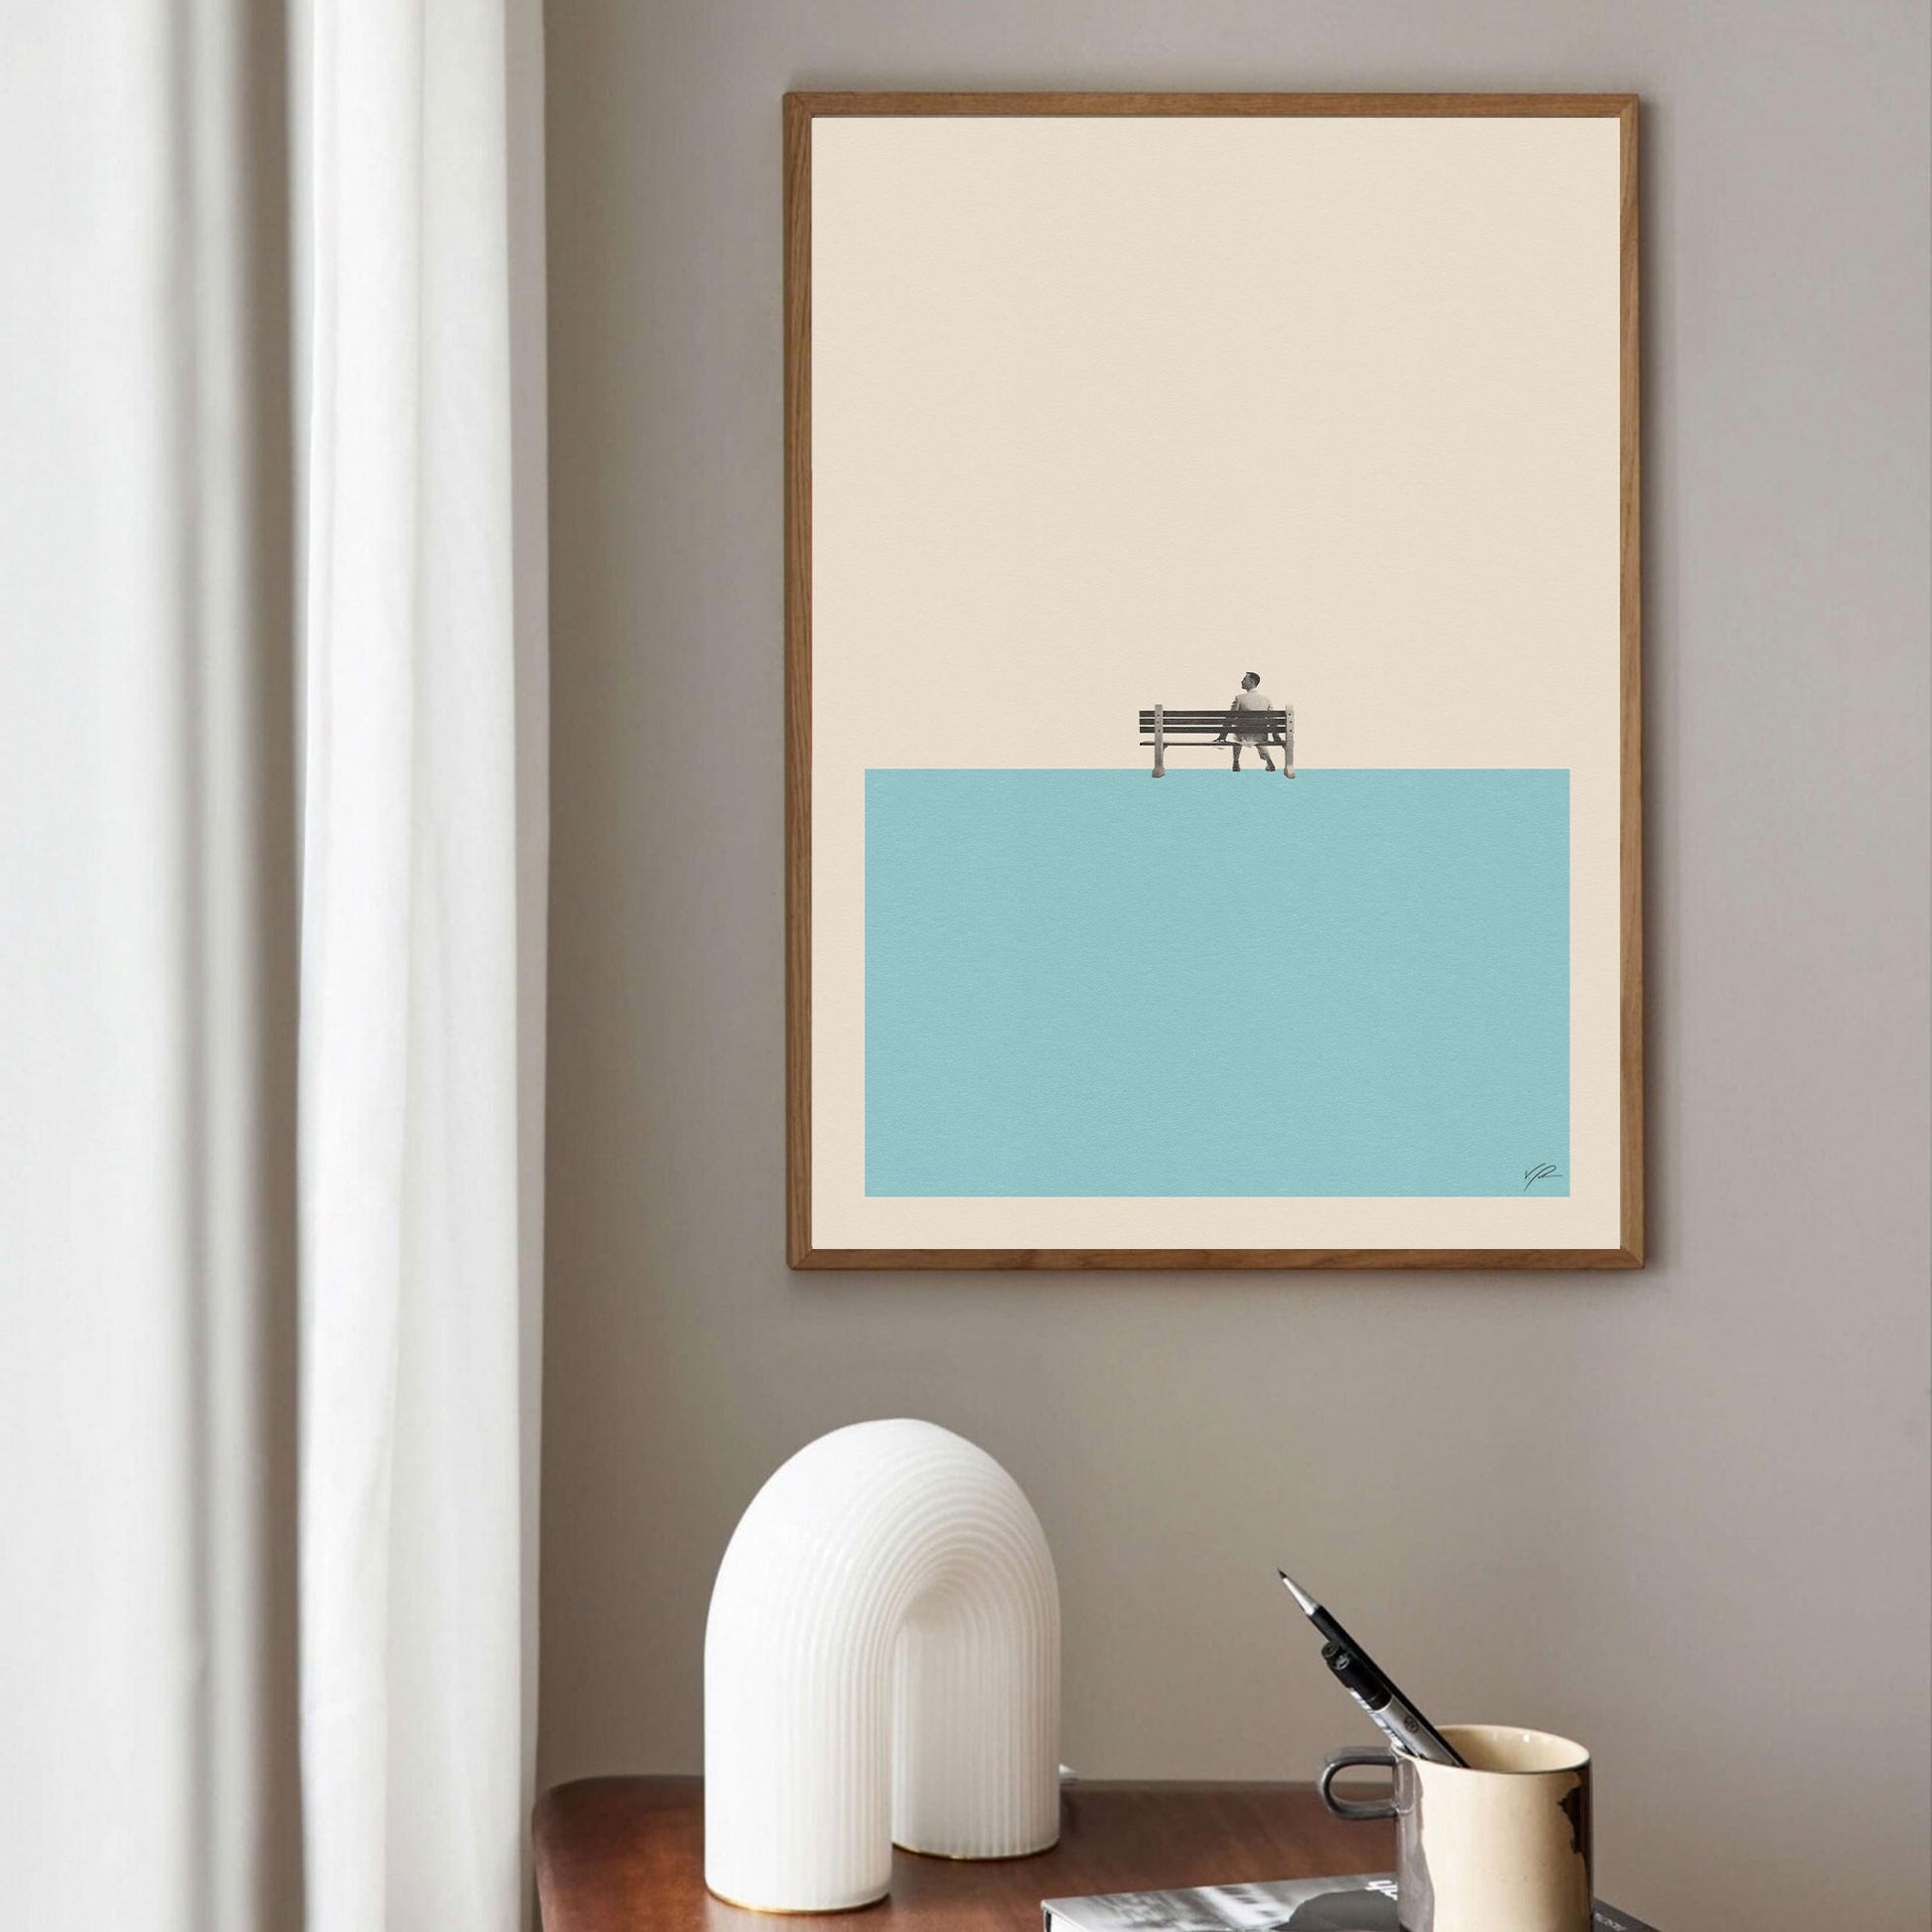 A museum quality framed print of thewallflowerclub's Forrest Gump sitting on a bench in the water.